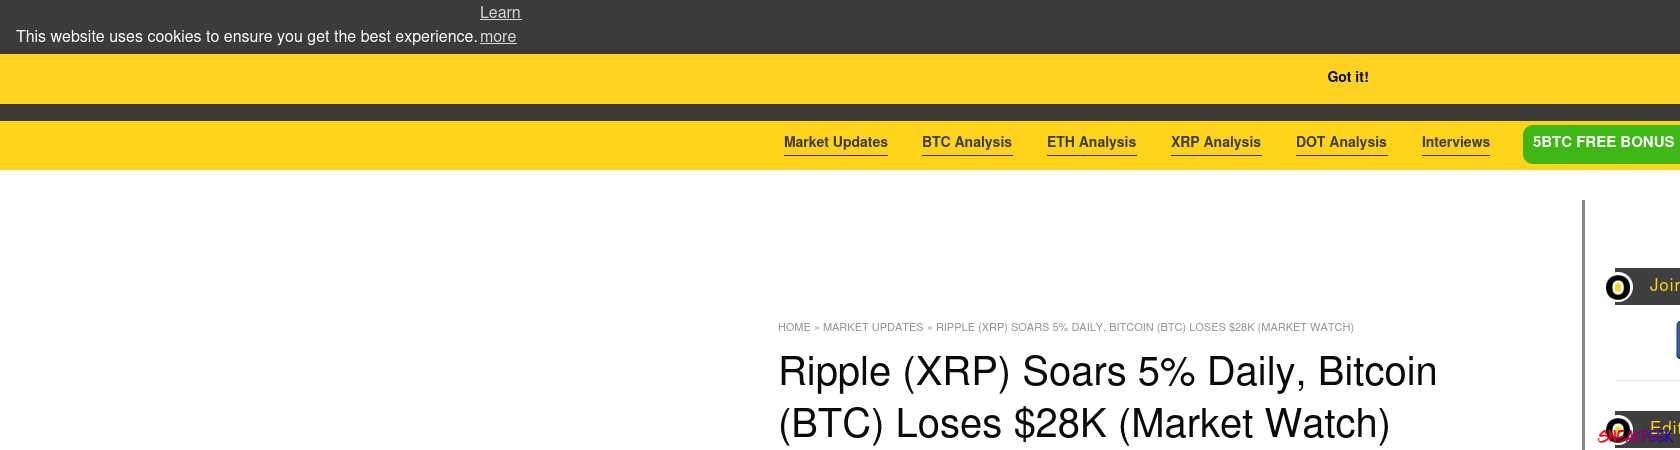 Read the full Article:  ⭲ Ripple (XRP) Soars 5% Daily, Bitcoin (BTC) Loses $28K (Market Watch)